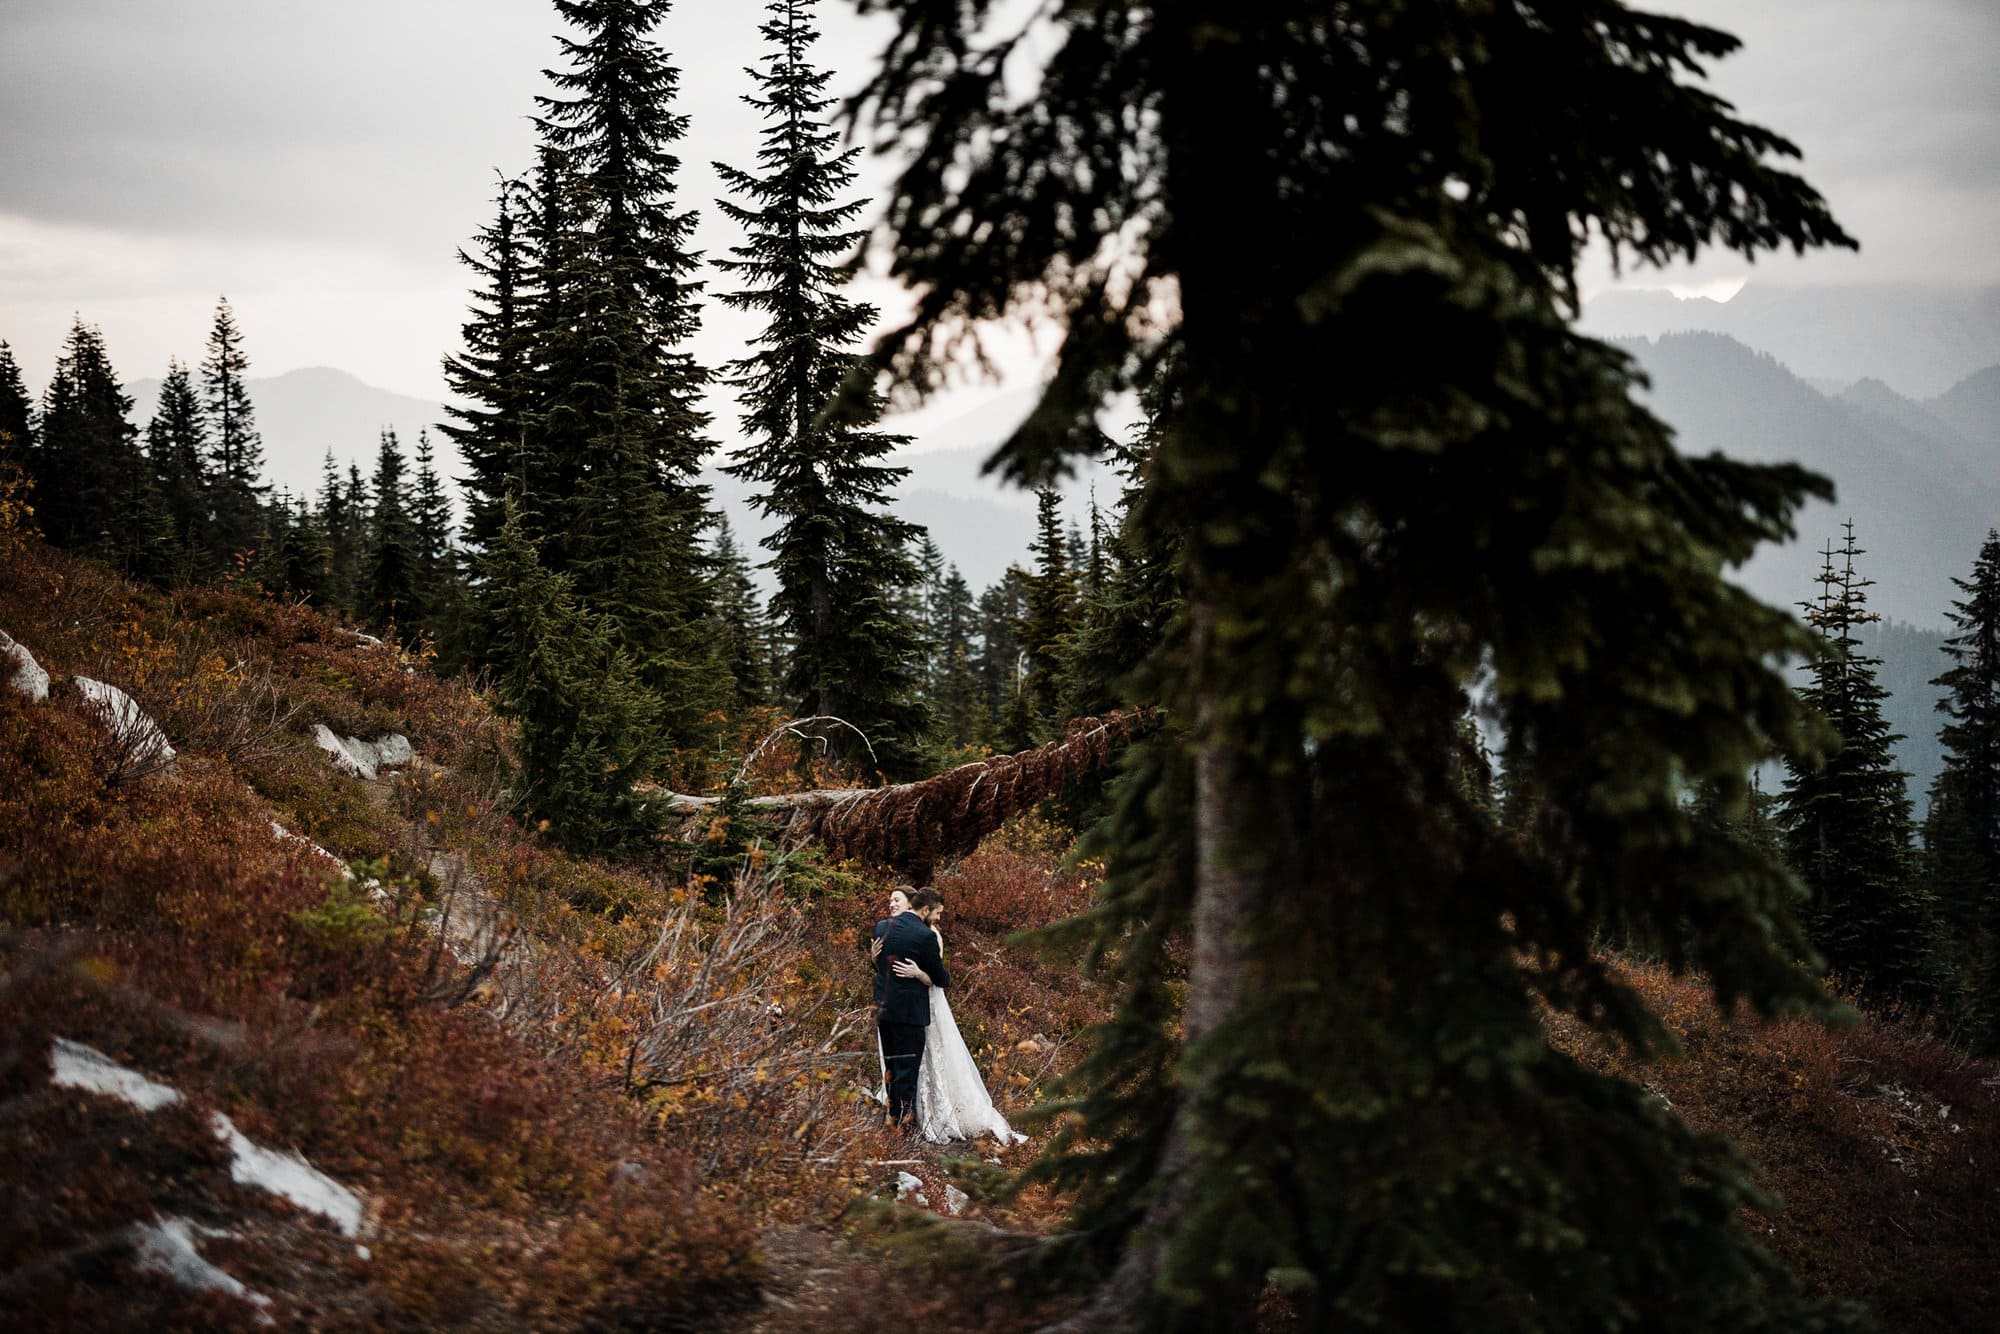 Nothing-not fires, smoke, or rain- would stop this pair of park rangers from getting married. Their Leavenworth hiking elopement really was one for the books.